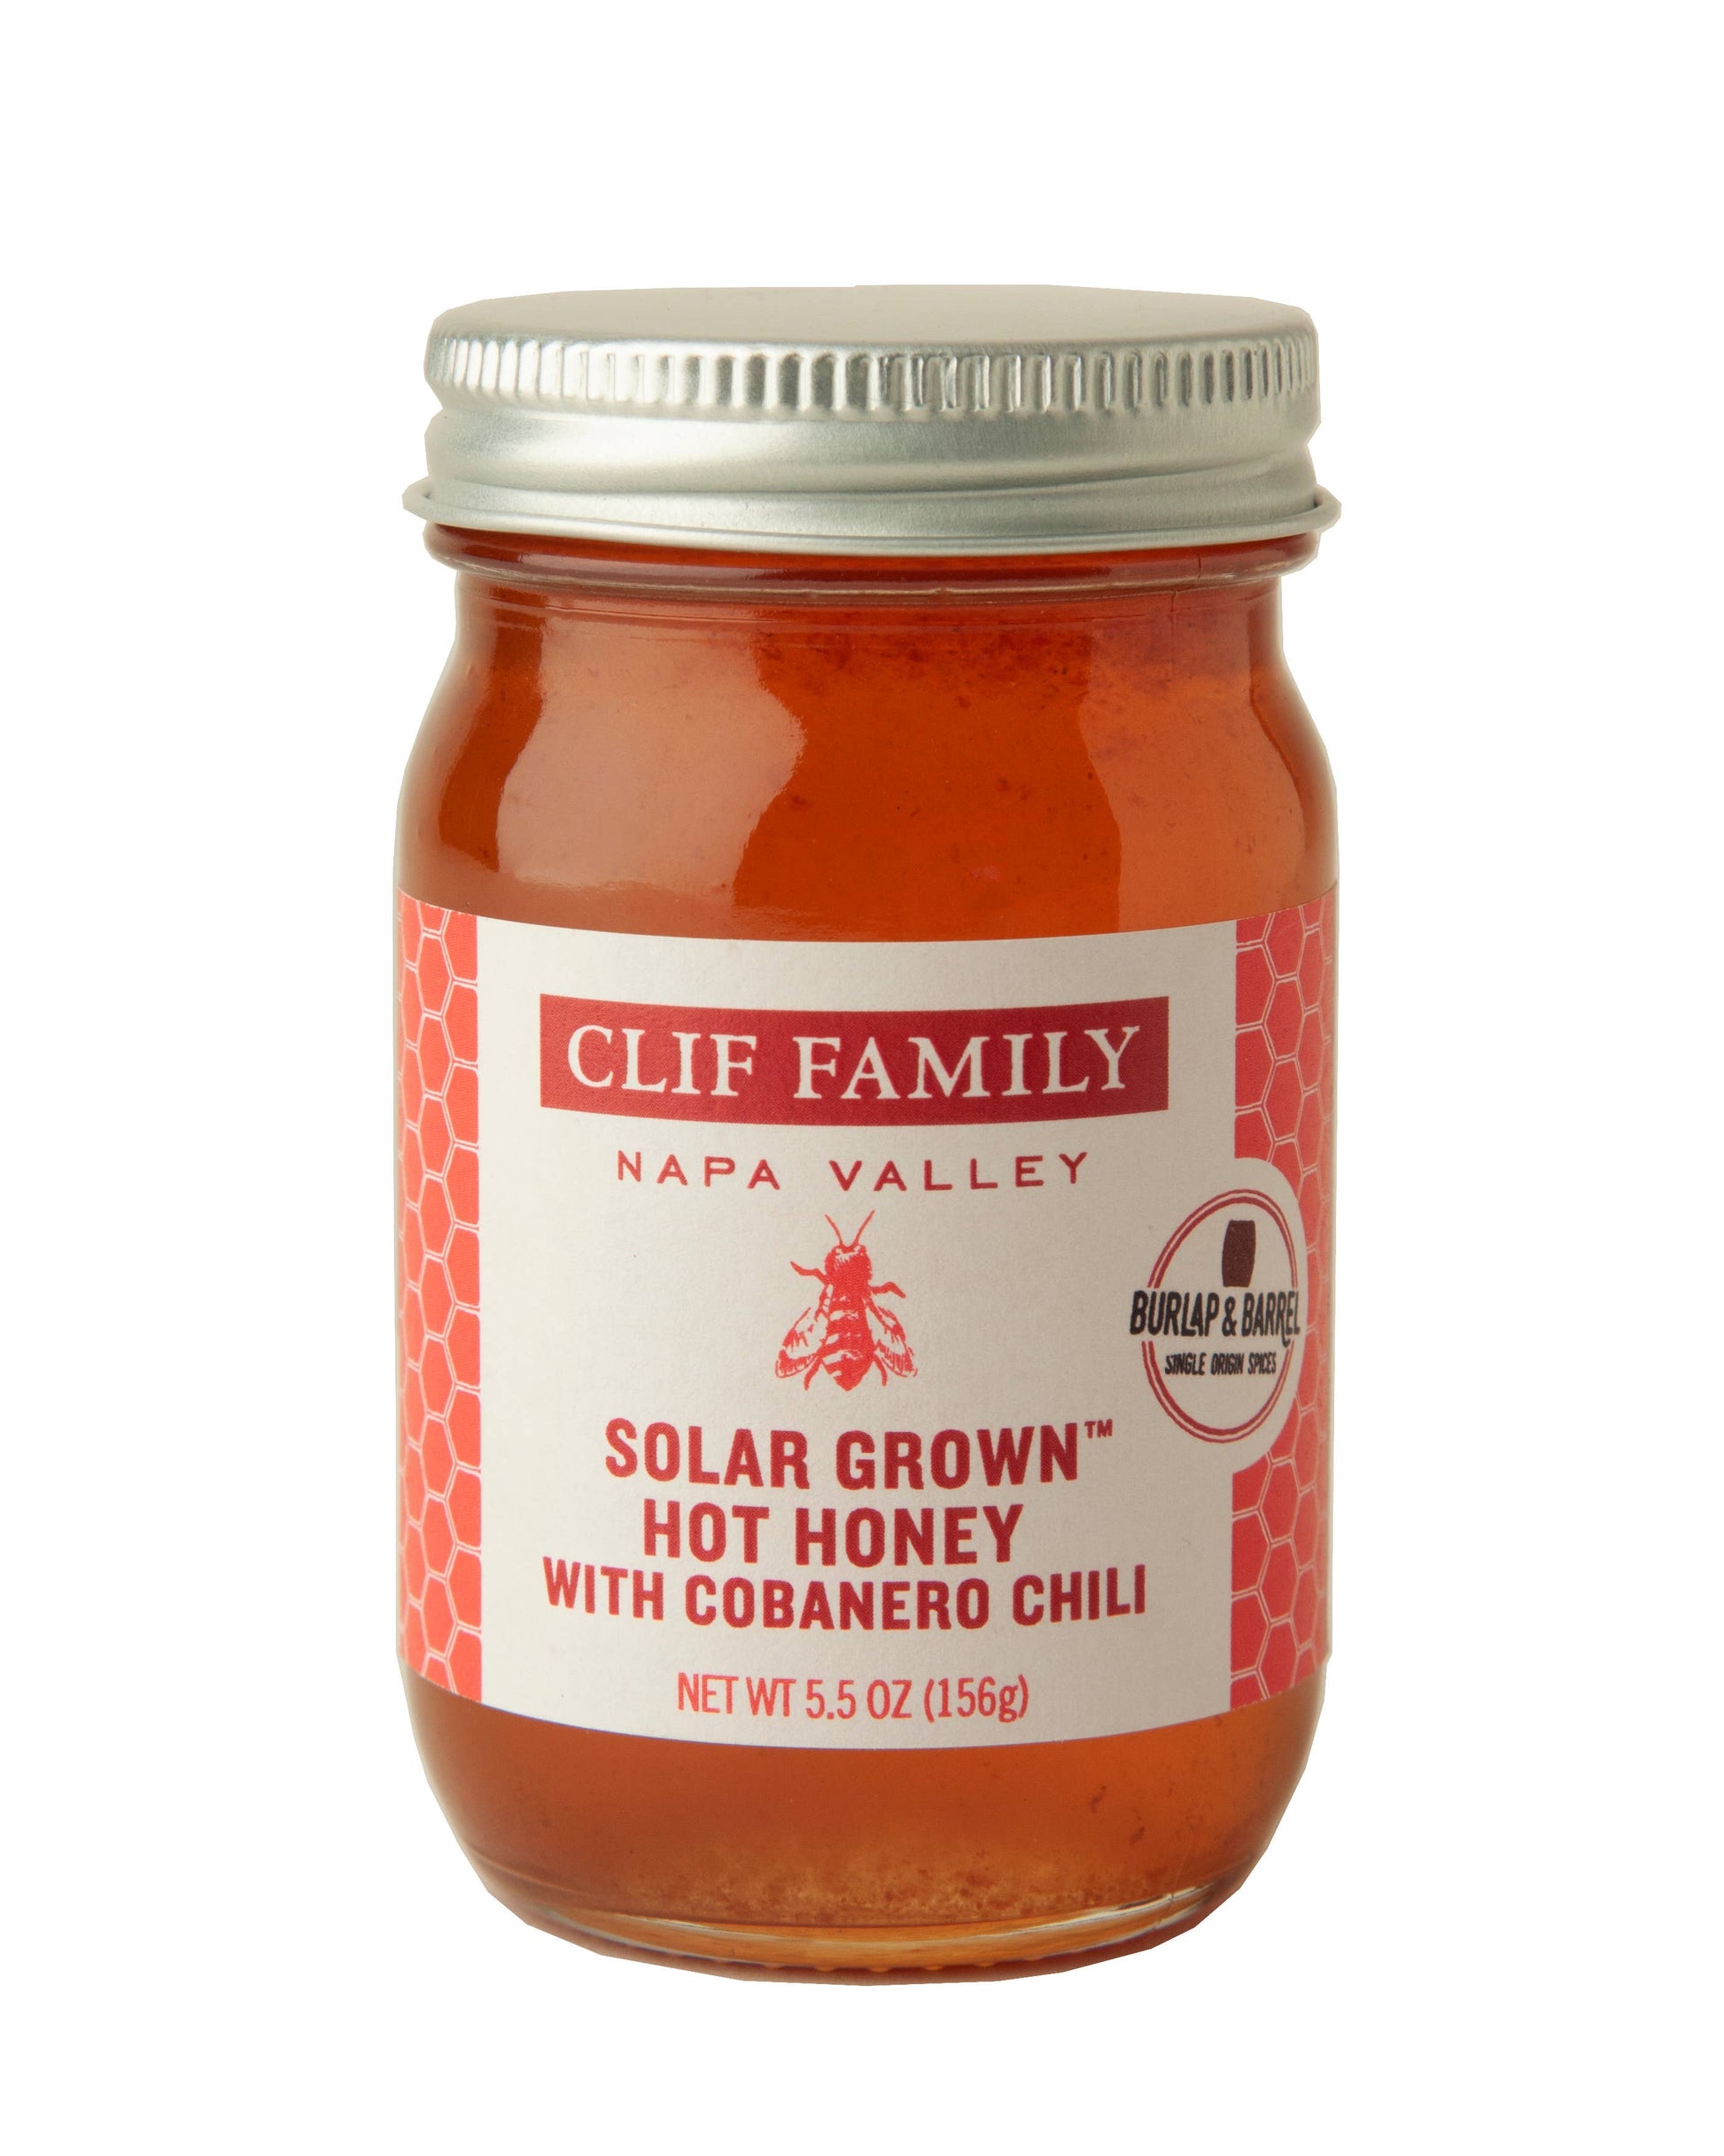 Solar Grown™ Hot Honey with Cobanero Chili  Clif Family Napa Valley, Certified B Corp Company   -better made easy-eco-friendly-sustainable-gifting